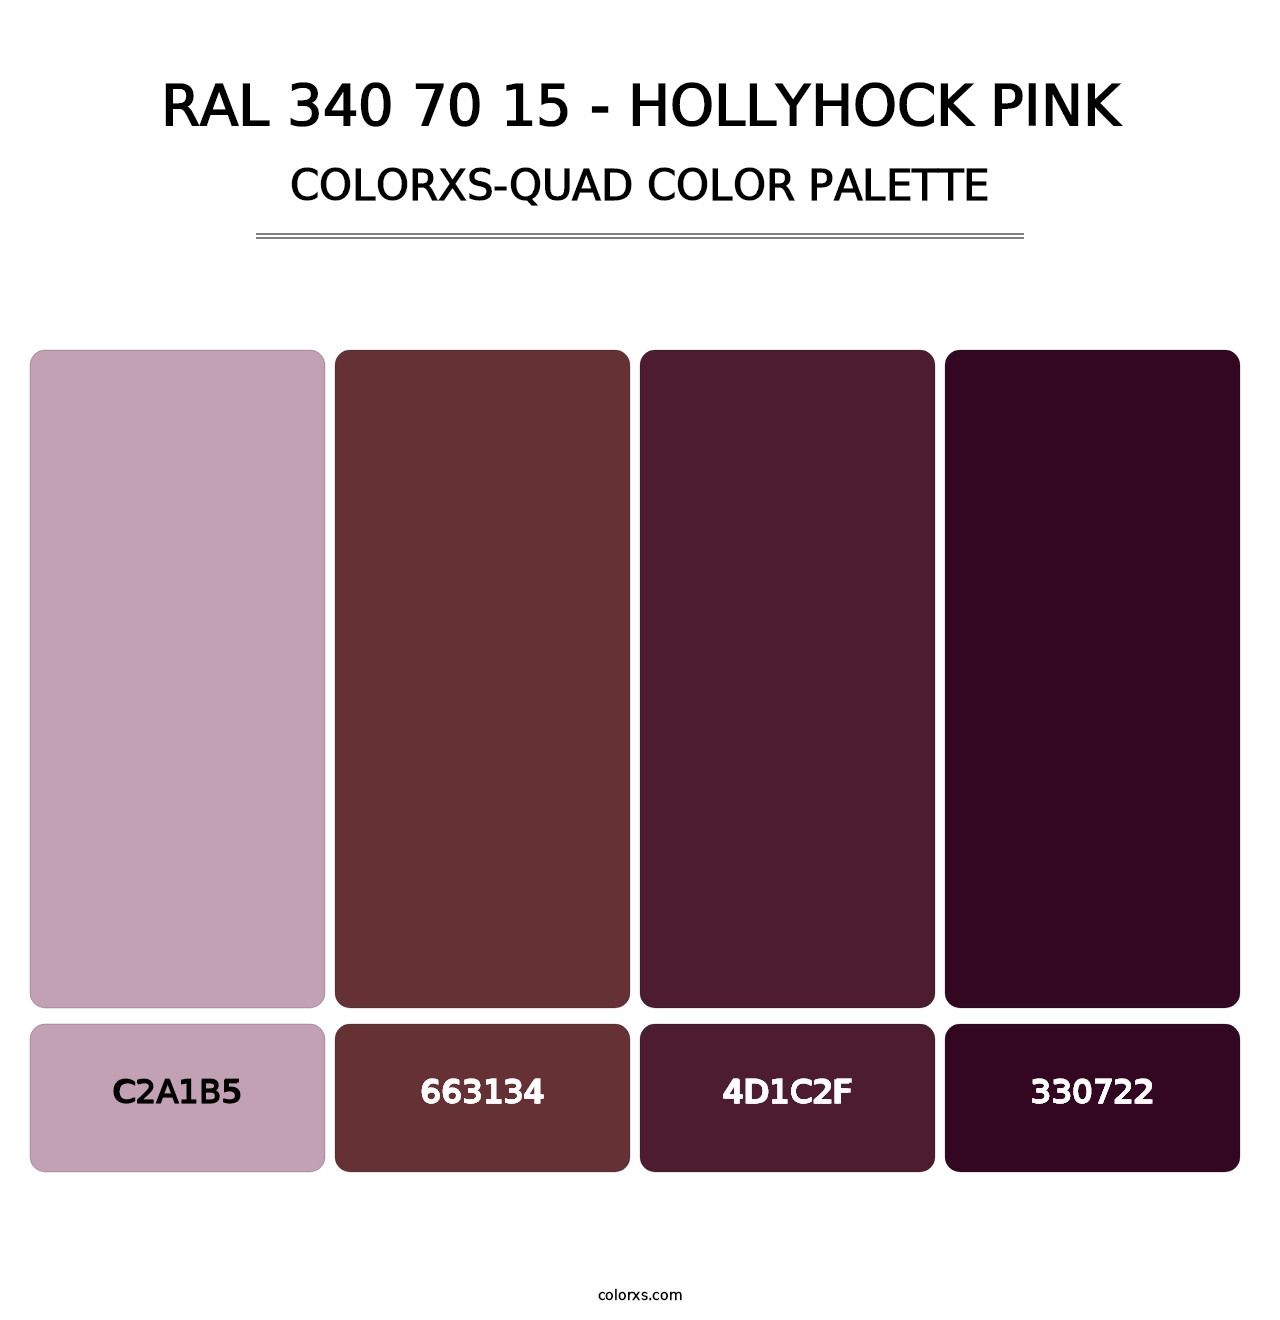 RAL 340 70 15 - Hollyhock Pink - Colorxs Quad Palette